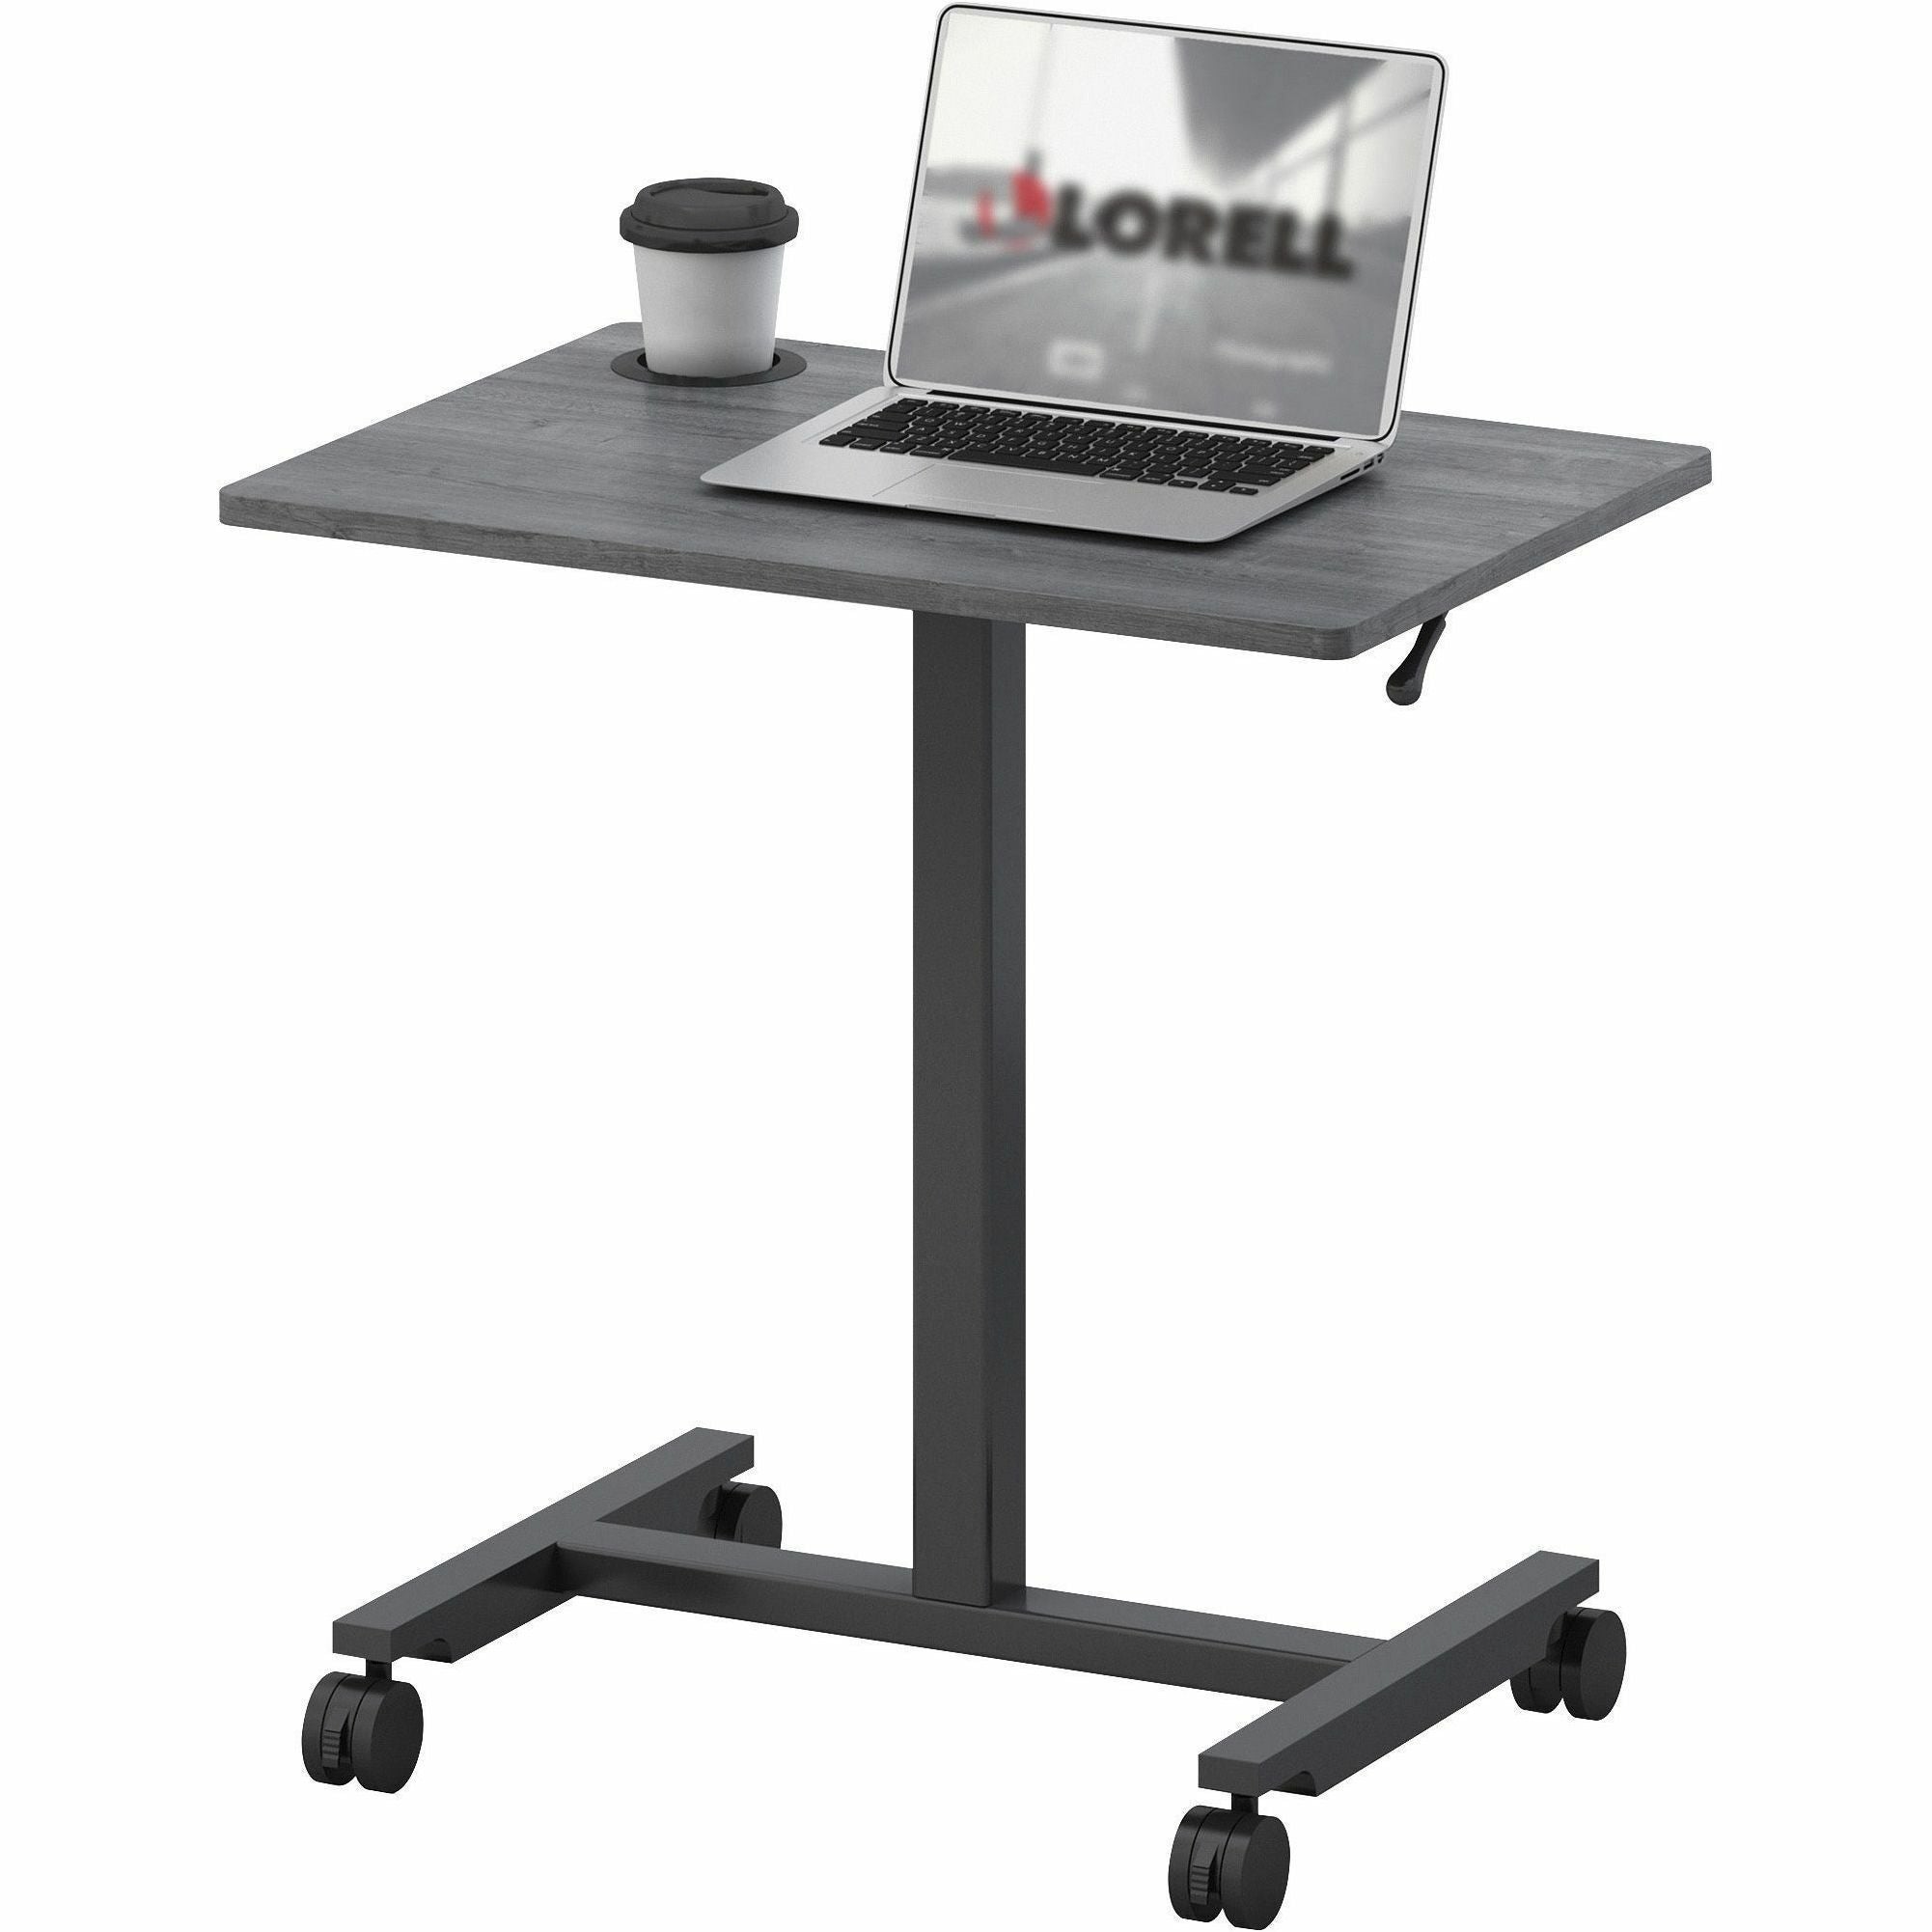 lorell-height-adjustable-mobile-desk-for-table-topweathered-charcoal-laminate-top-powder-coated-base-adjustable-height-30-to-4363-adjustment-43-height-x-2663-width-x-1913-depth-assembly-required-1-each_llr84837 - 4